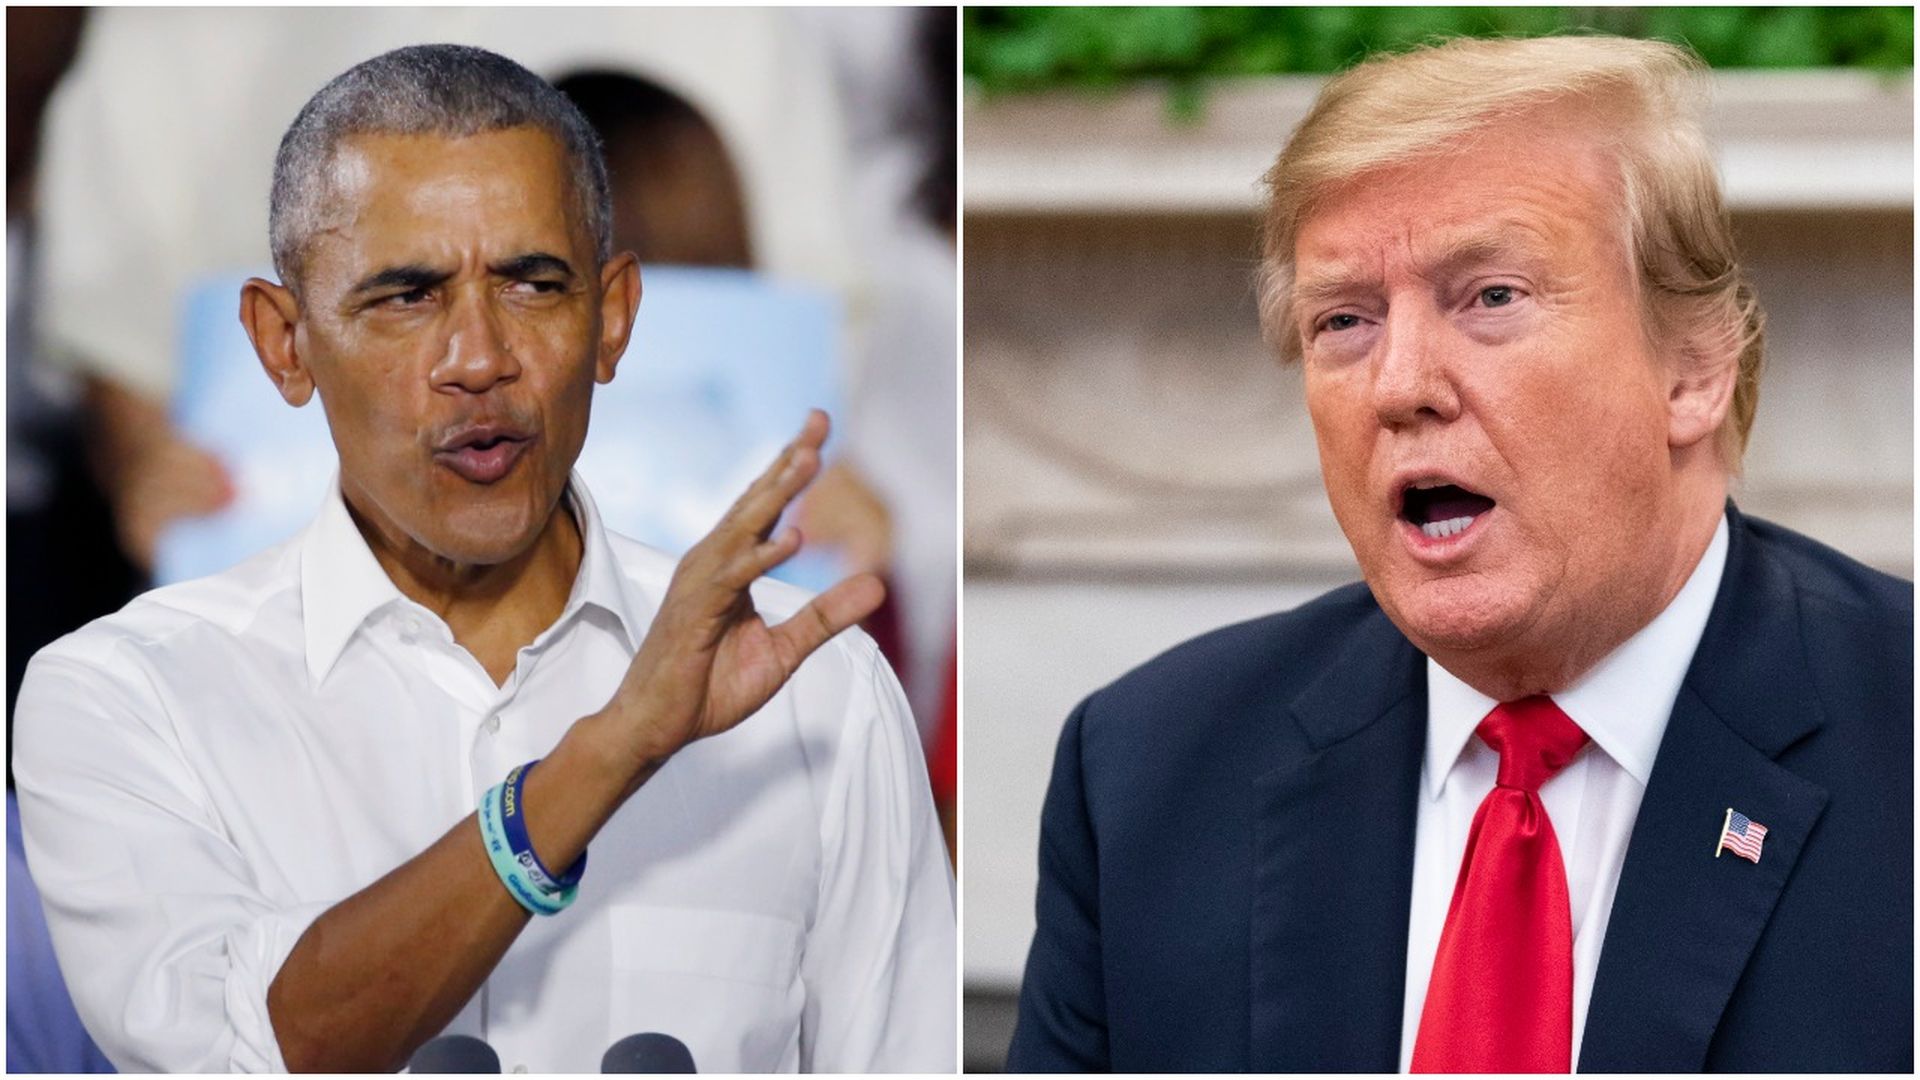 A split screen of former President Obama and President Trump, who are both speaking. 